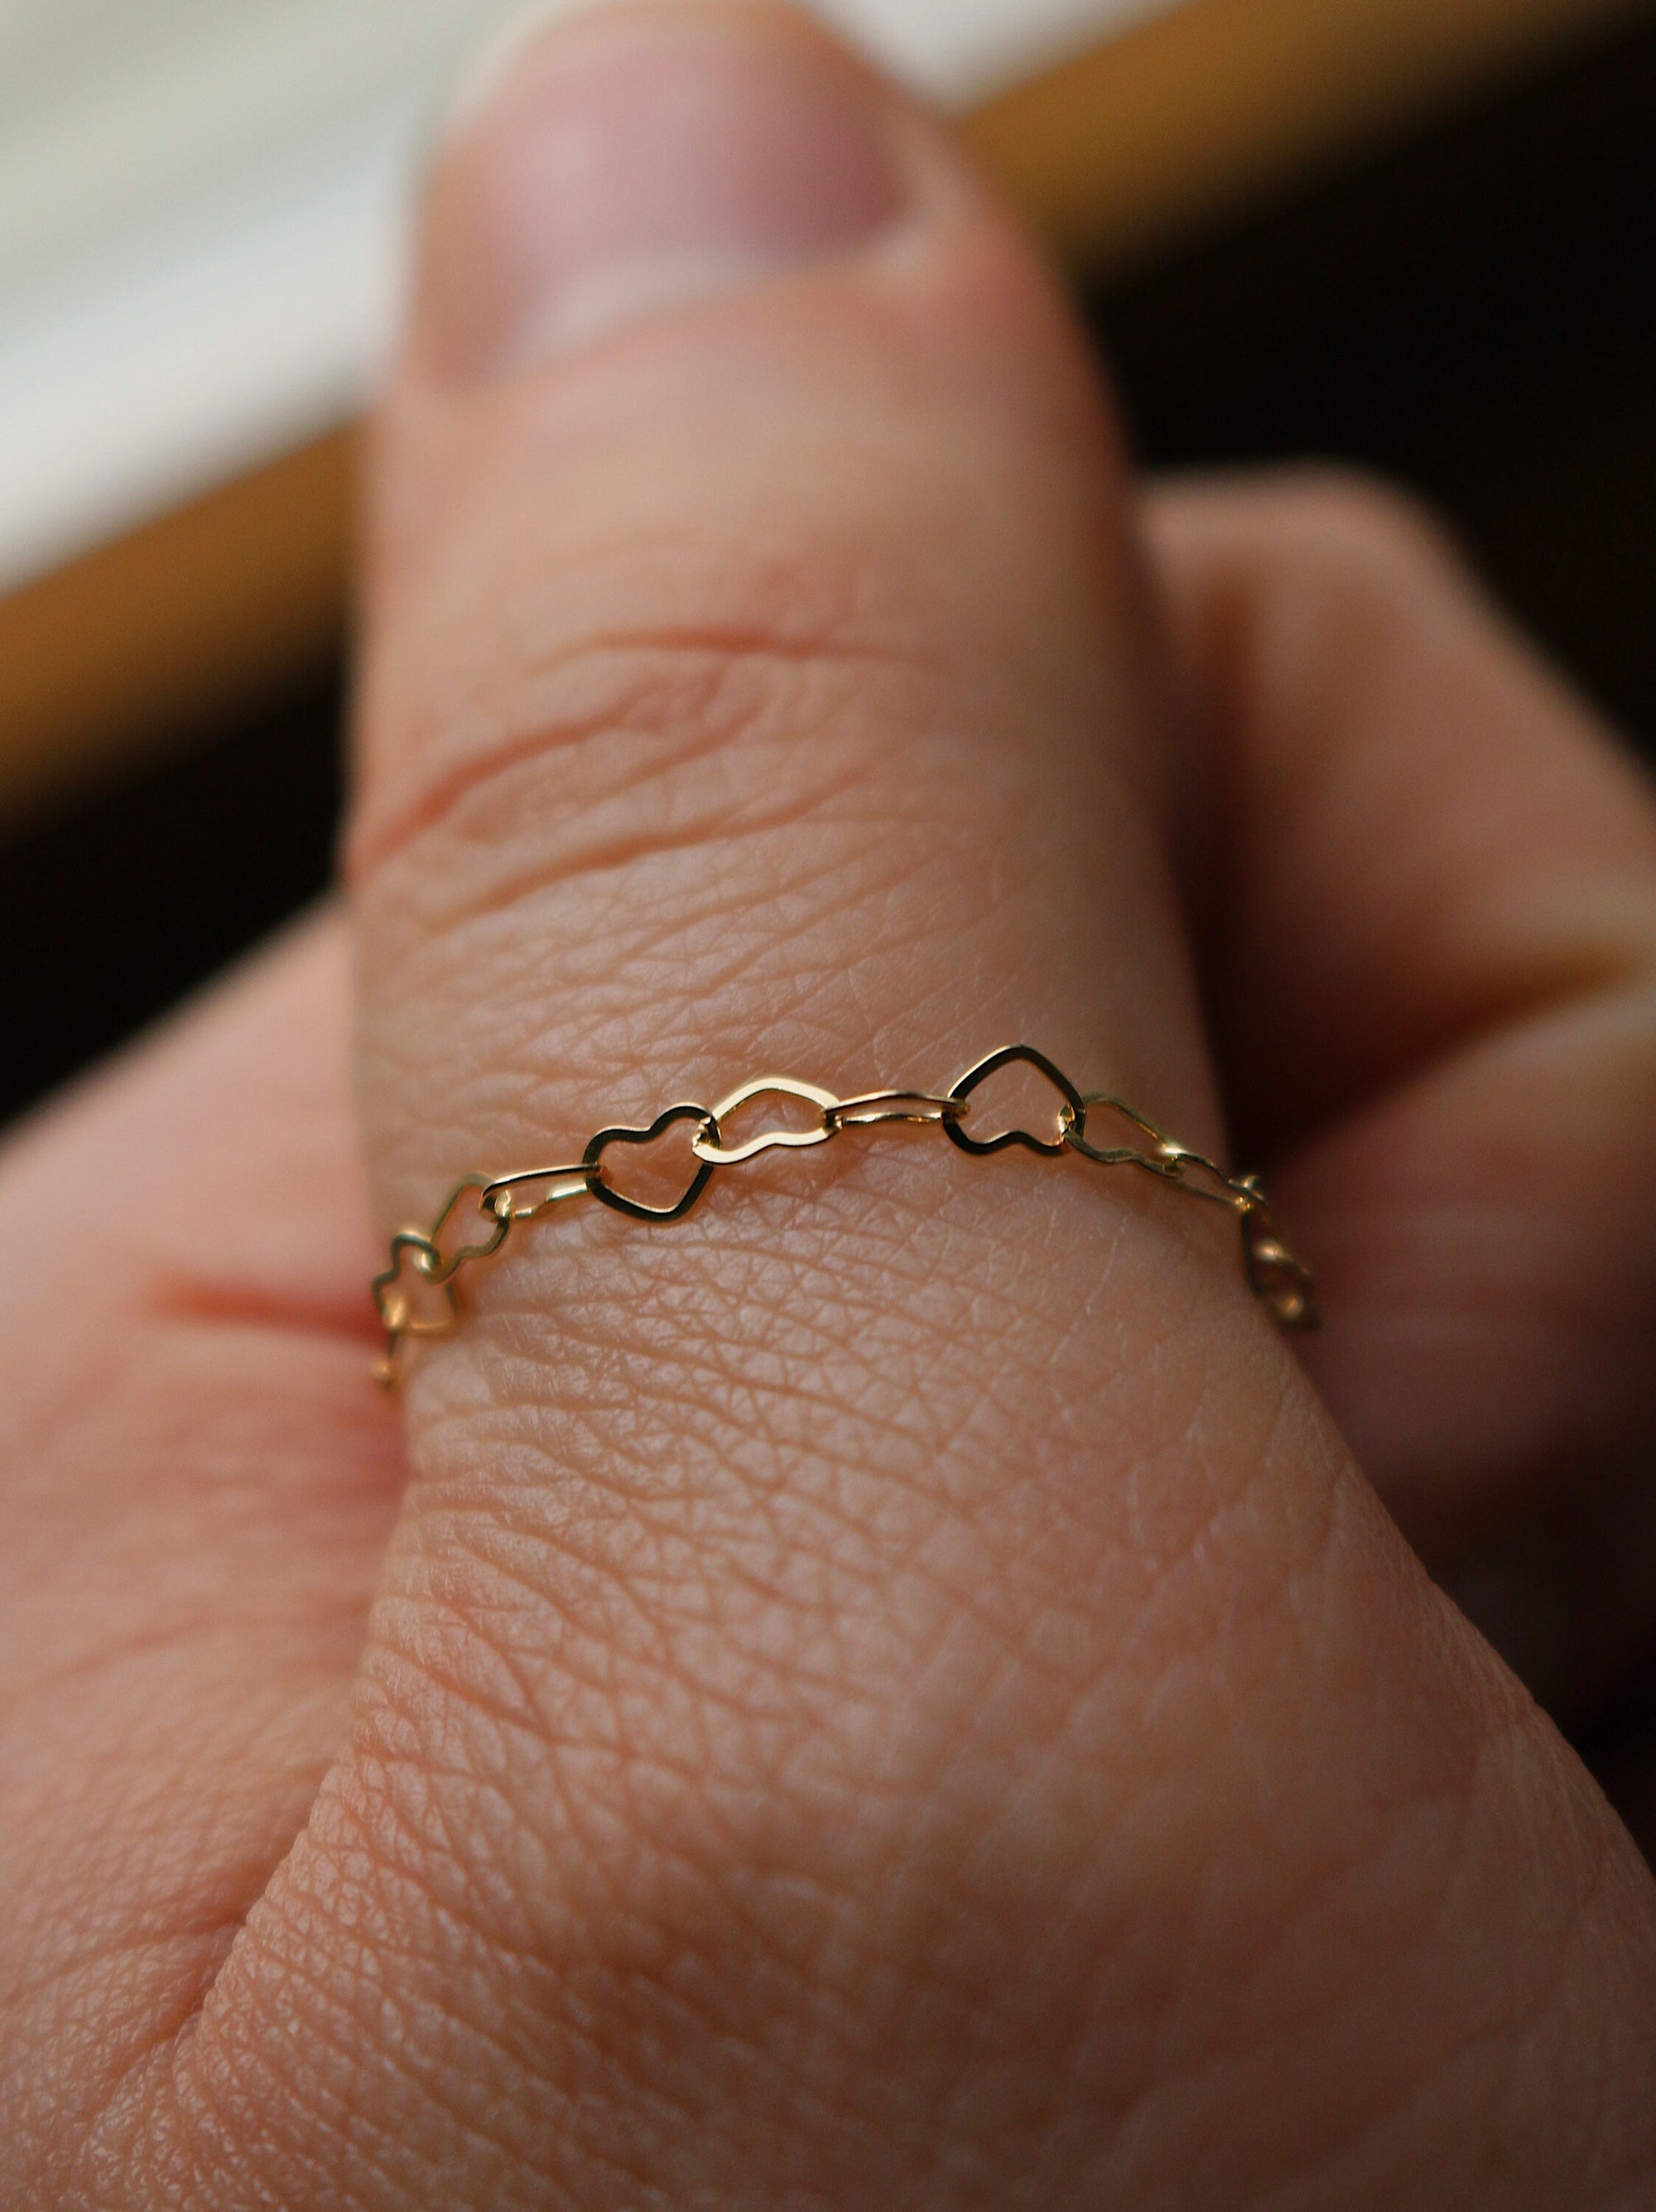 Large Heart Ring | 14k Gold Chain Ring | Gold Filled Heart Chain Ring | Chain Layering Ring | Dainty Gold Jewelry | Everyday Ring for Her